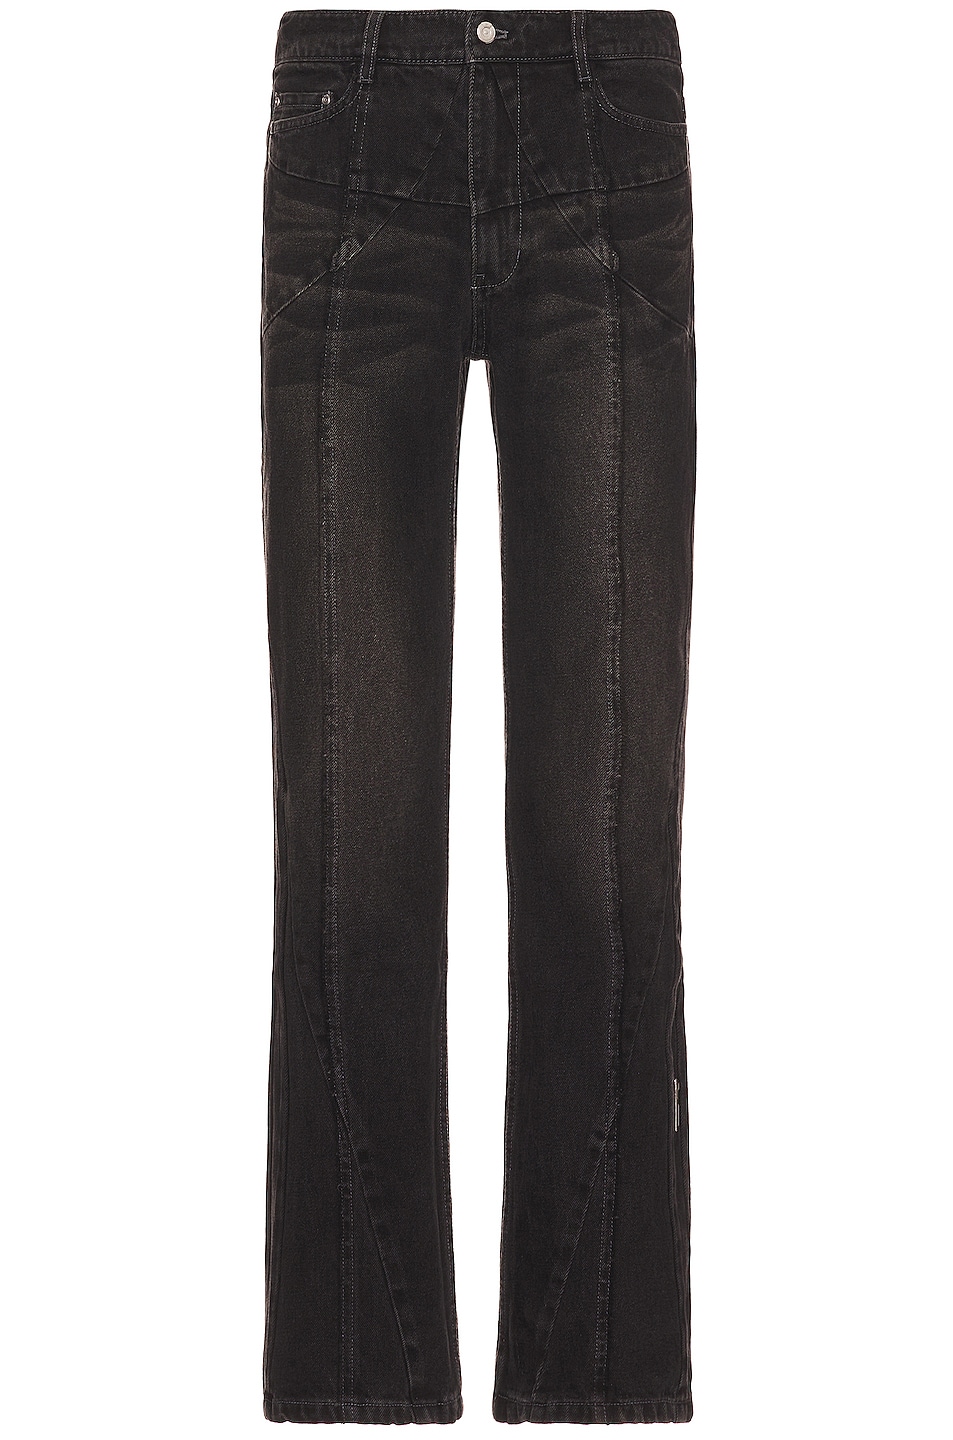 Image 1 of C2H4 Stagger Streamline Arch Jeans in Black